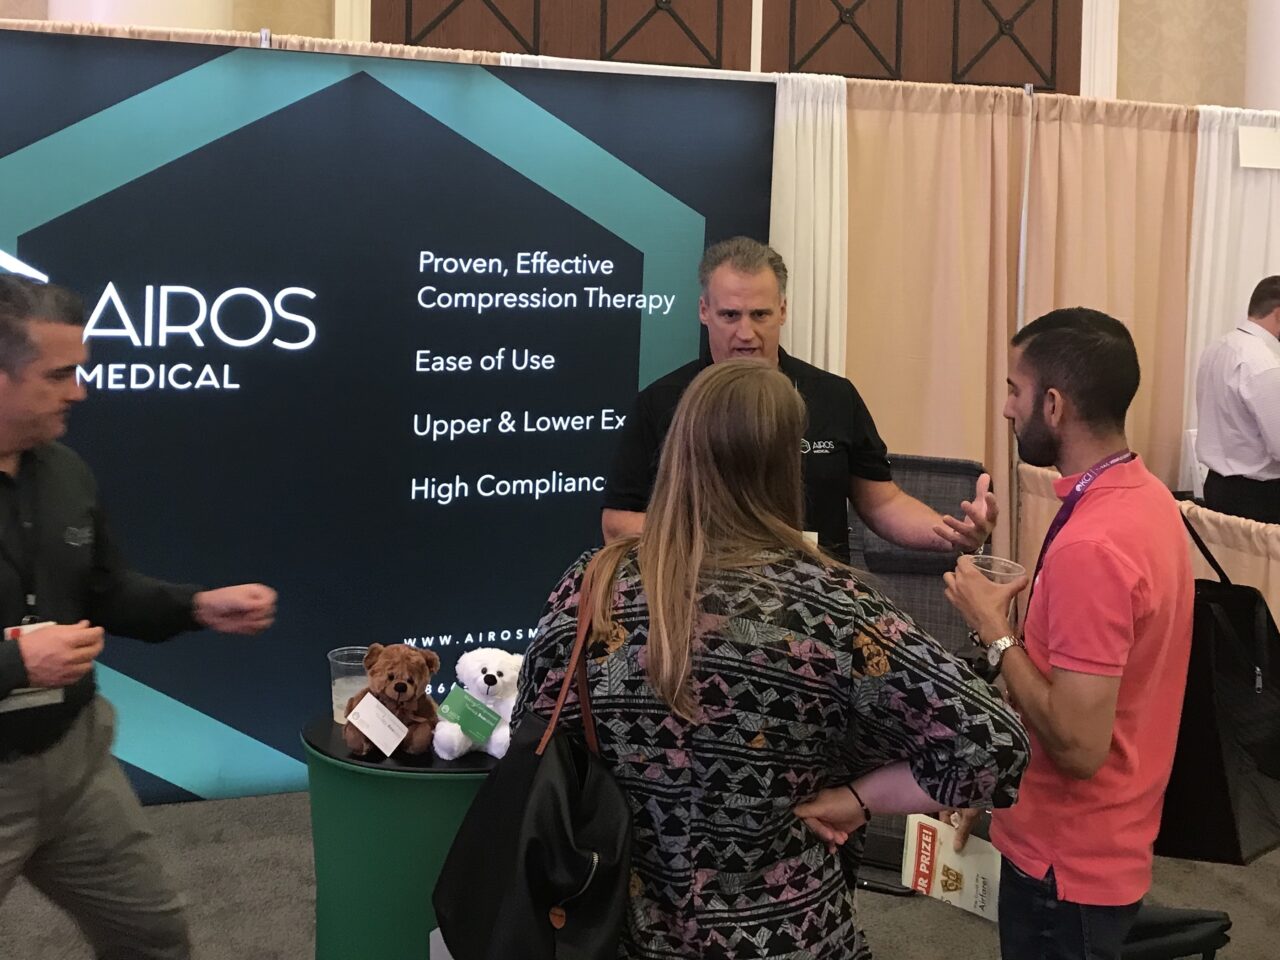 AIROS Medical Receives Excellent Feedback from Wound Care Experts at SAWC Fall 2018